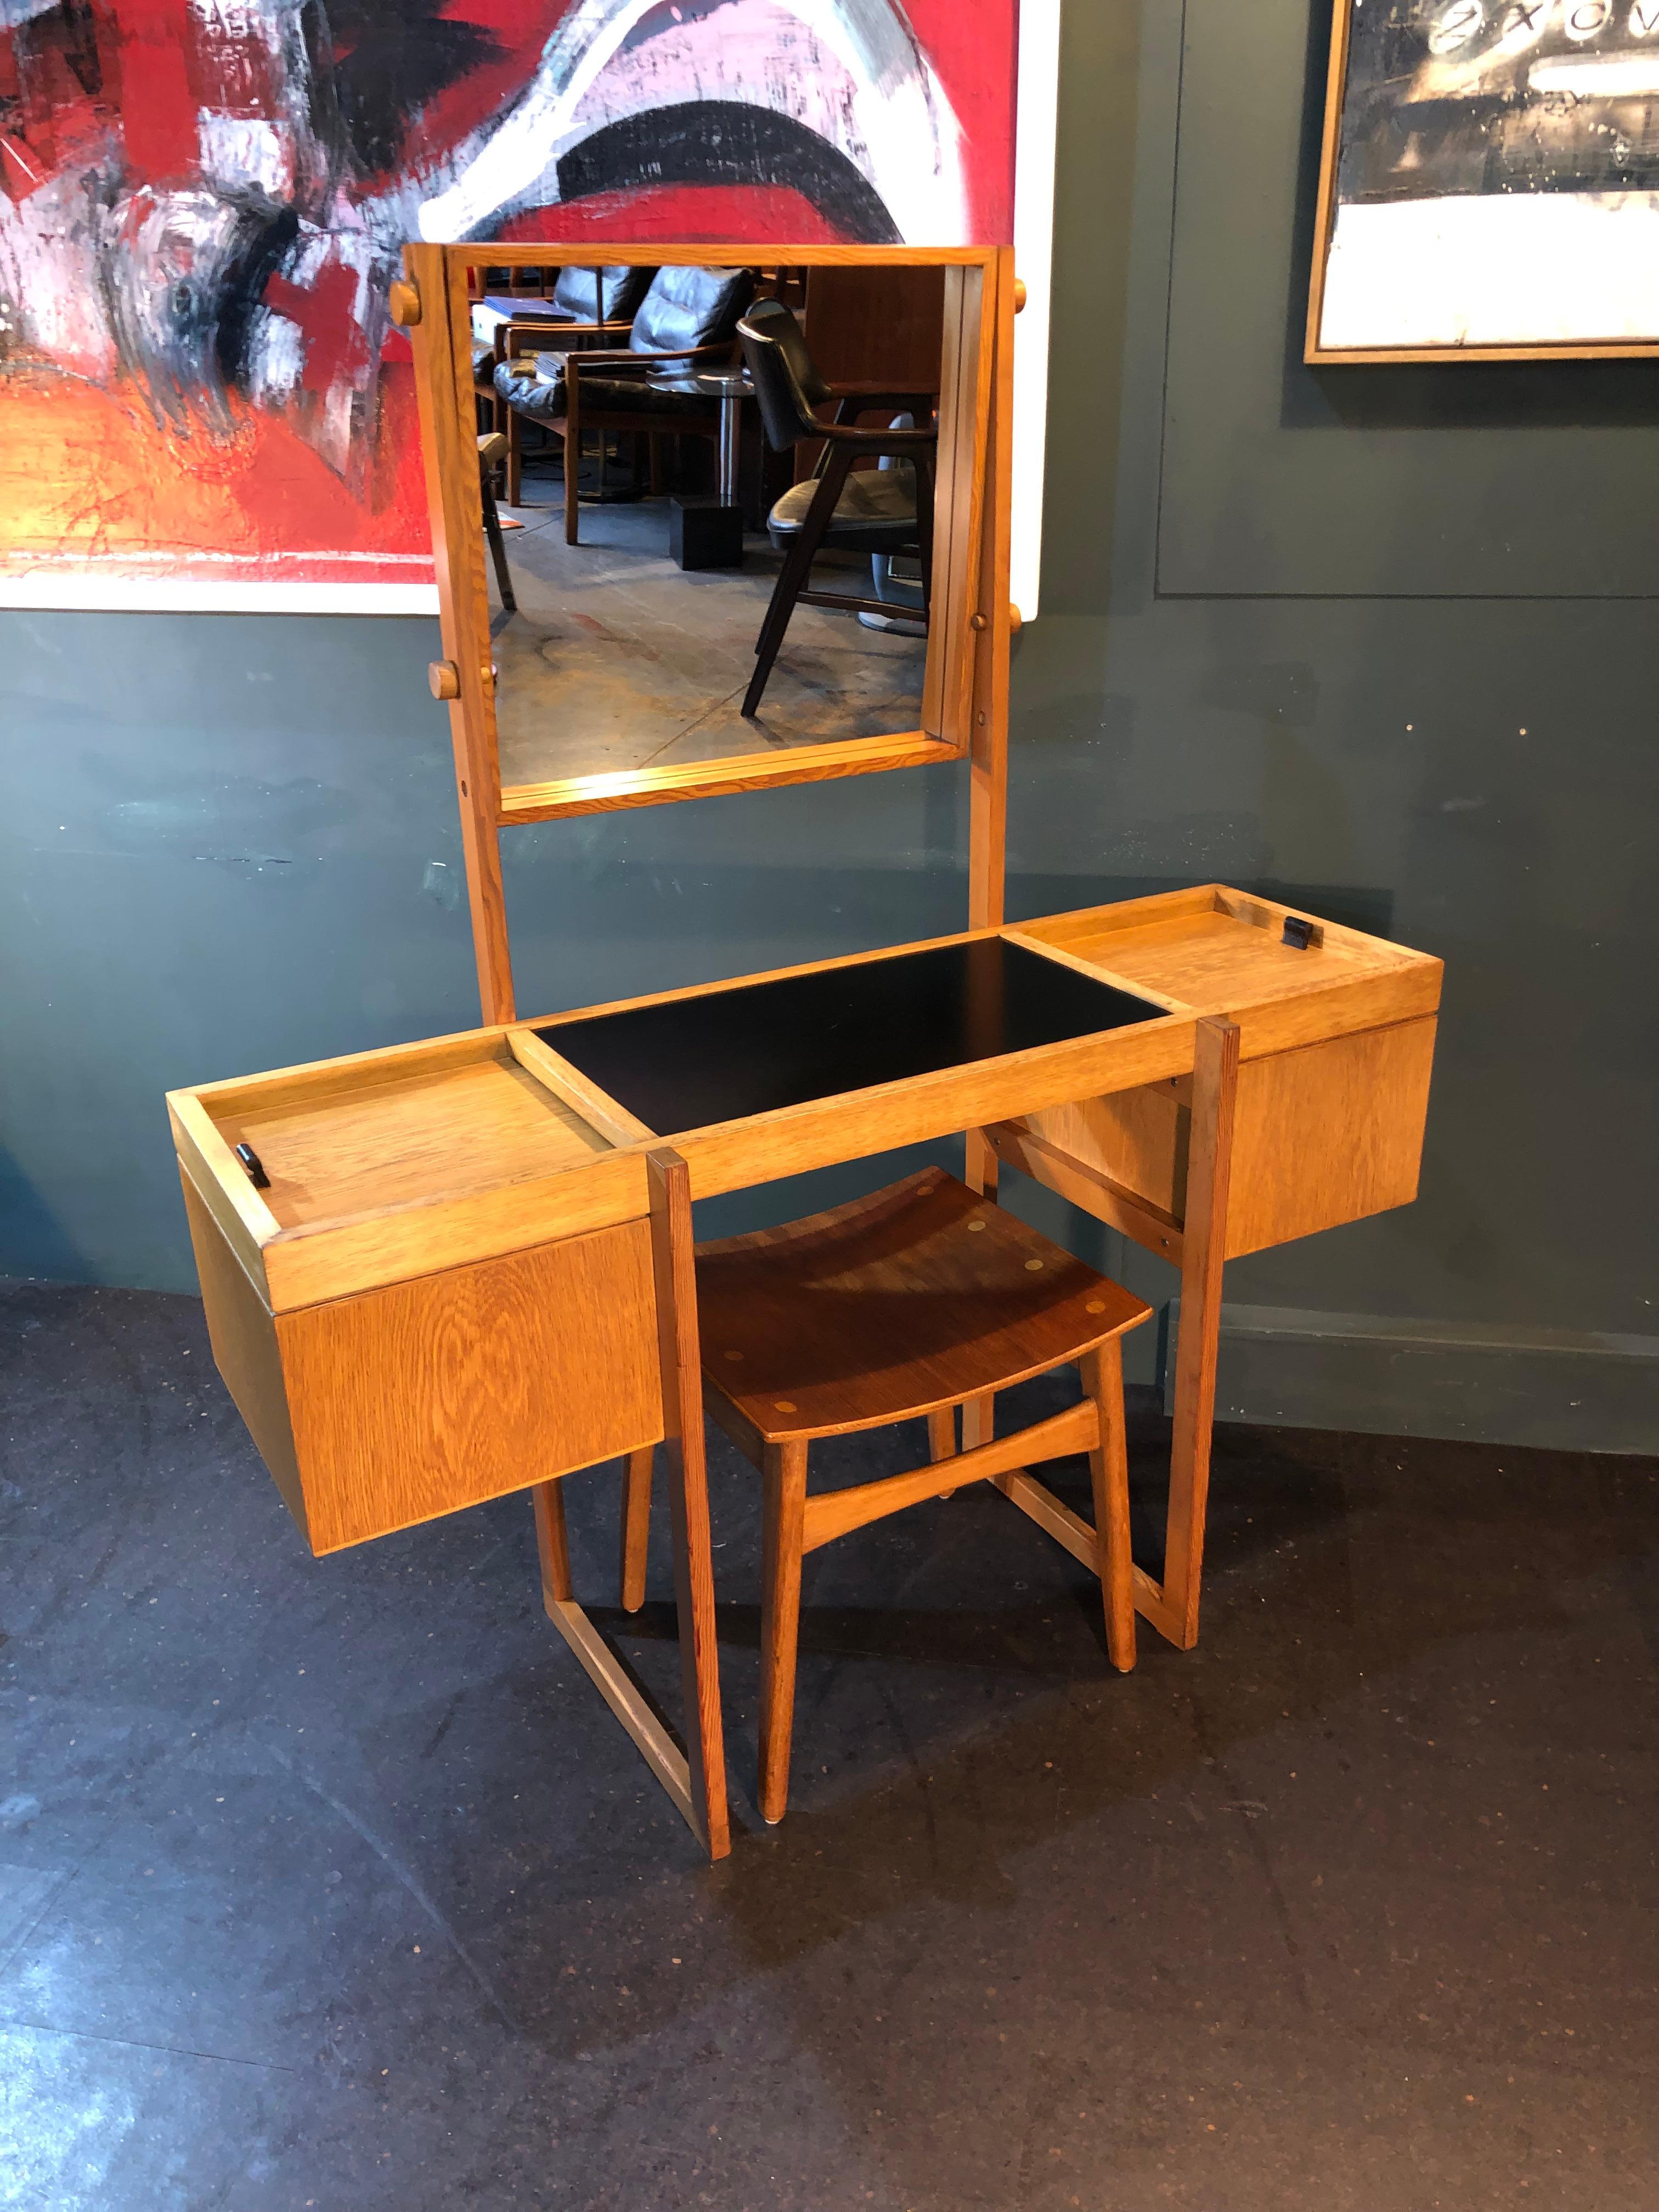 Fabulous Danish Mid-Century Modernist dressing table or vanity unit produced in Denmark, circa 1960. Perfect Scandinavian modernism in a highly unusual design and execution. Solid oak with Douglas fir construction with leather pull handles, black